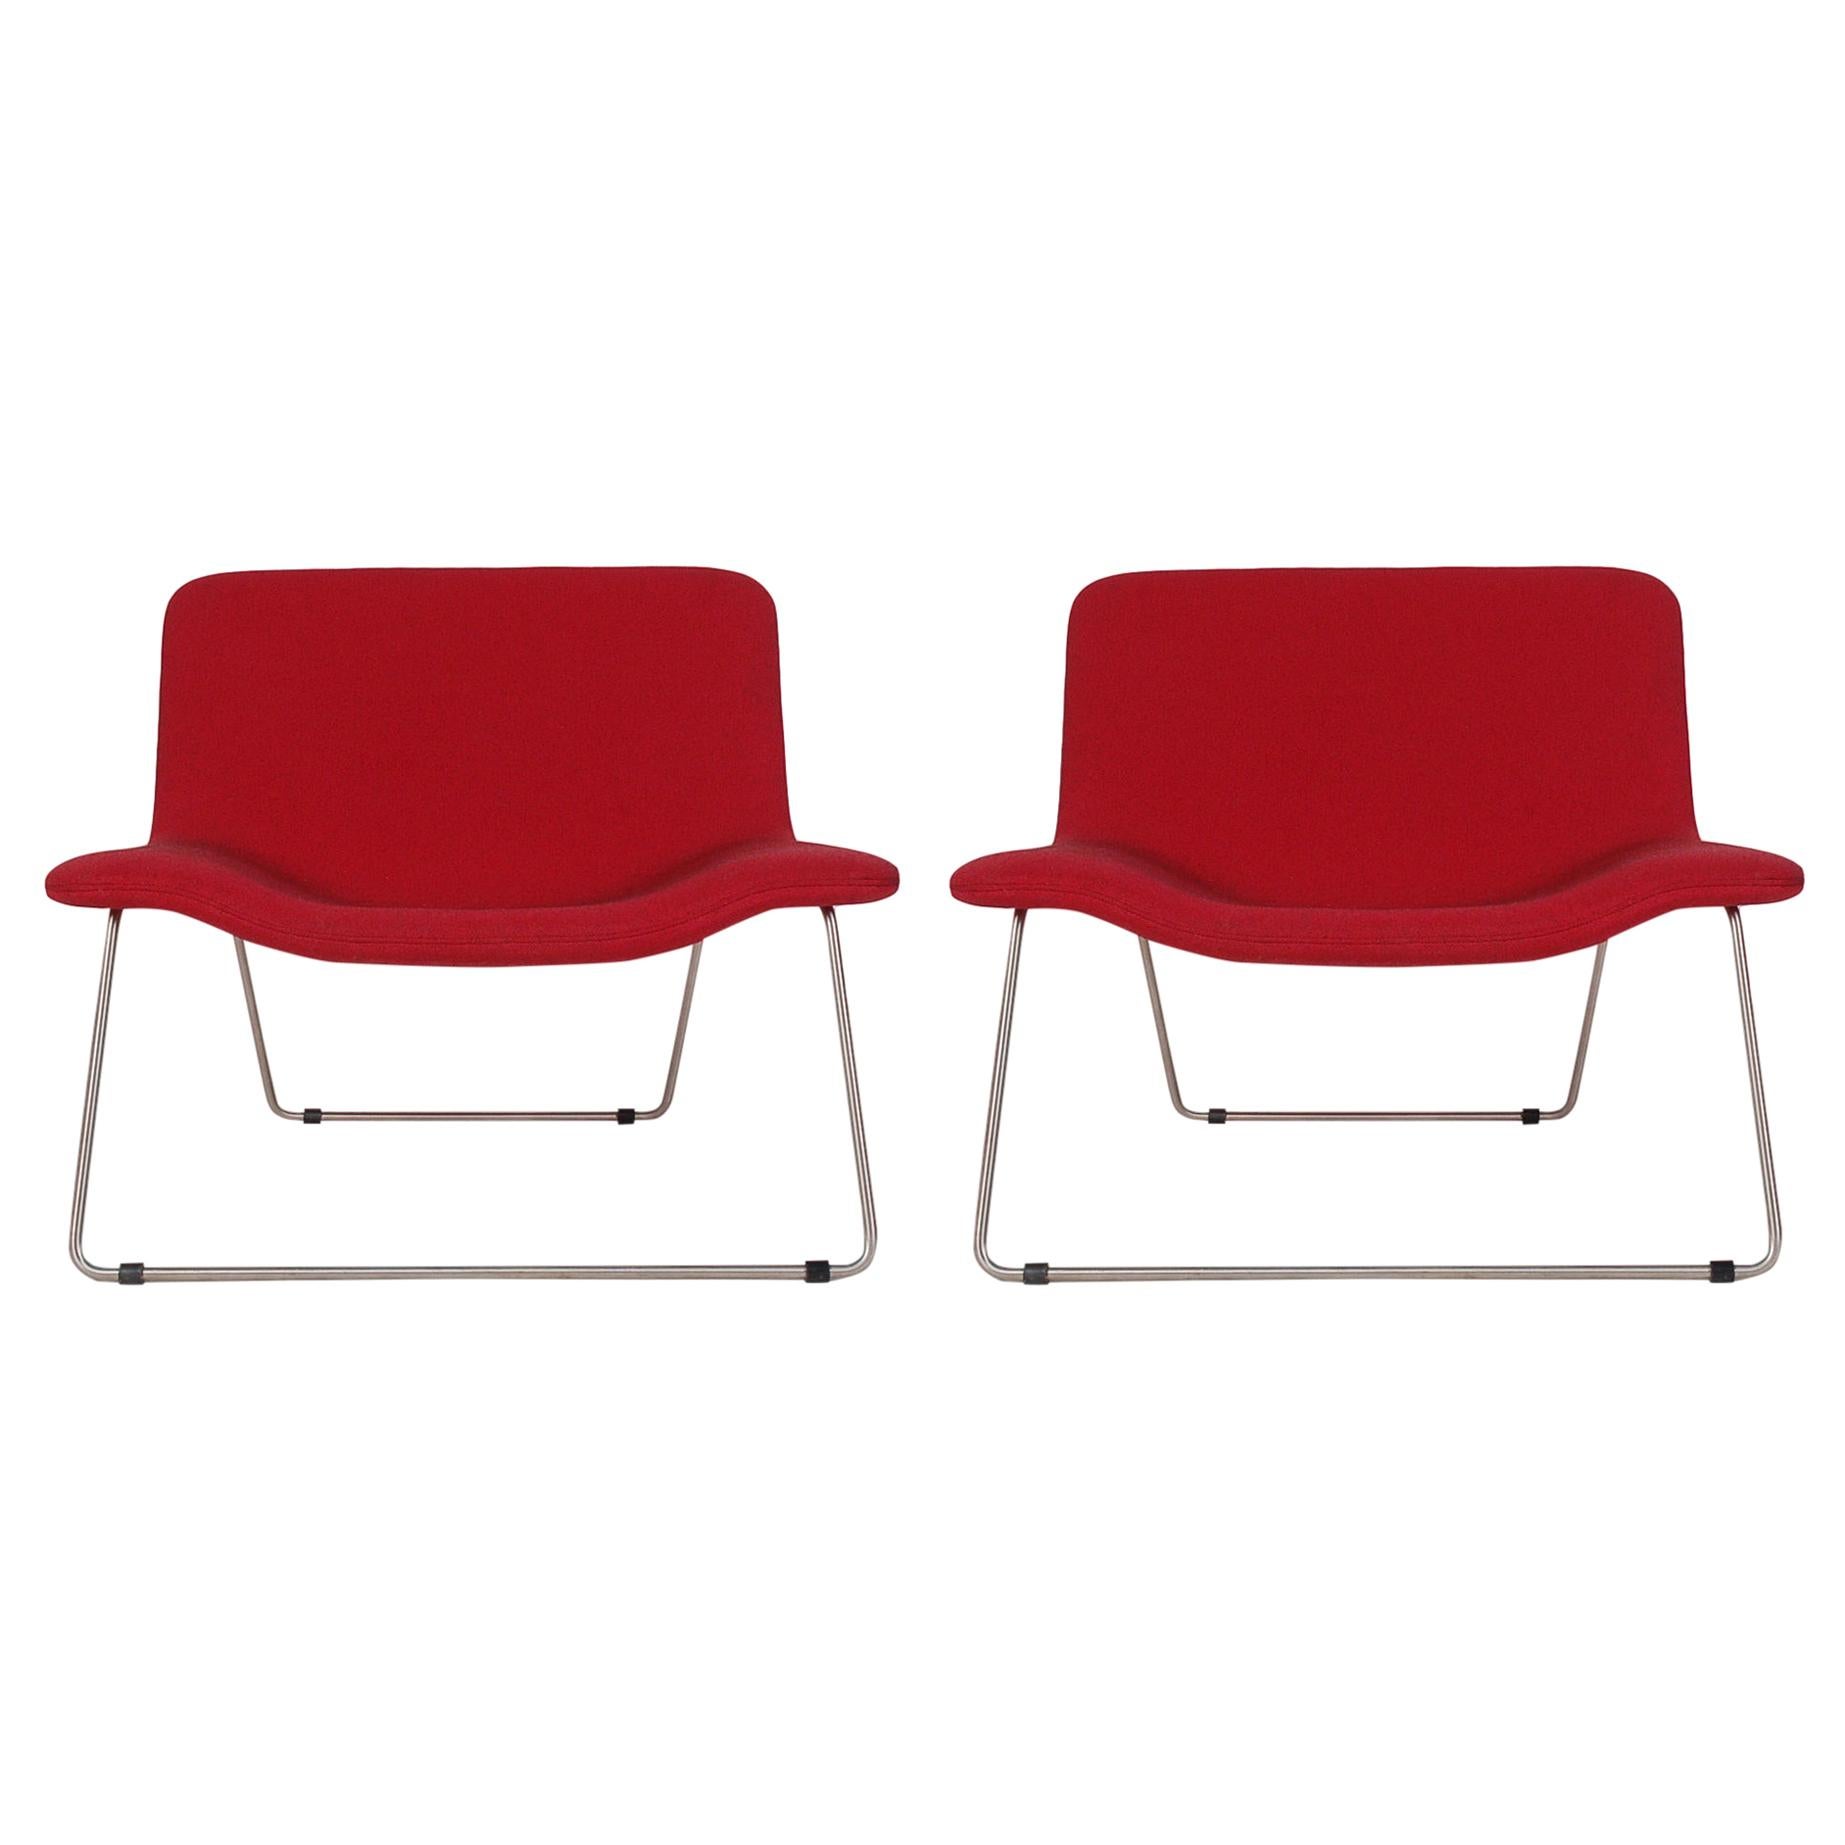 Matching Pair of Midcentury Italian Postmodern Red Lounge Chairs by Cappellini For Sale